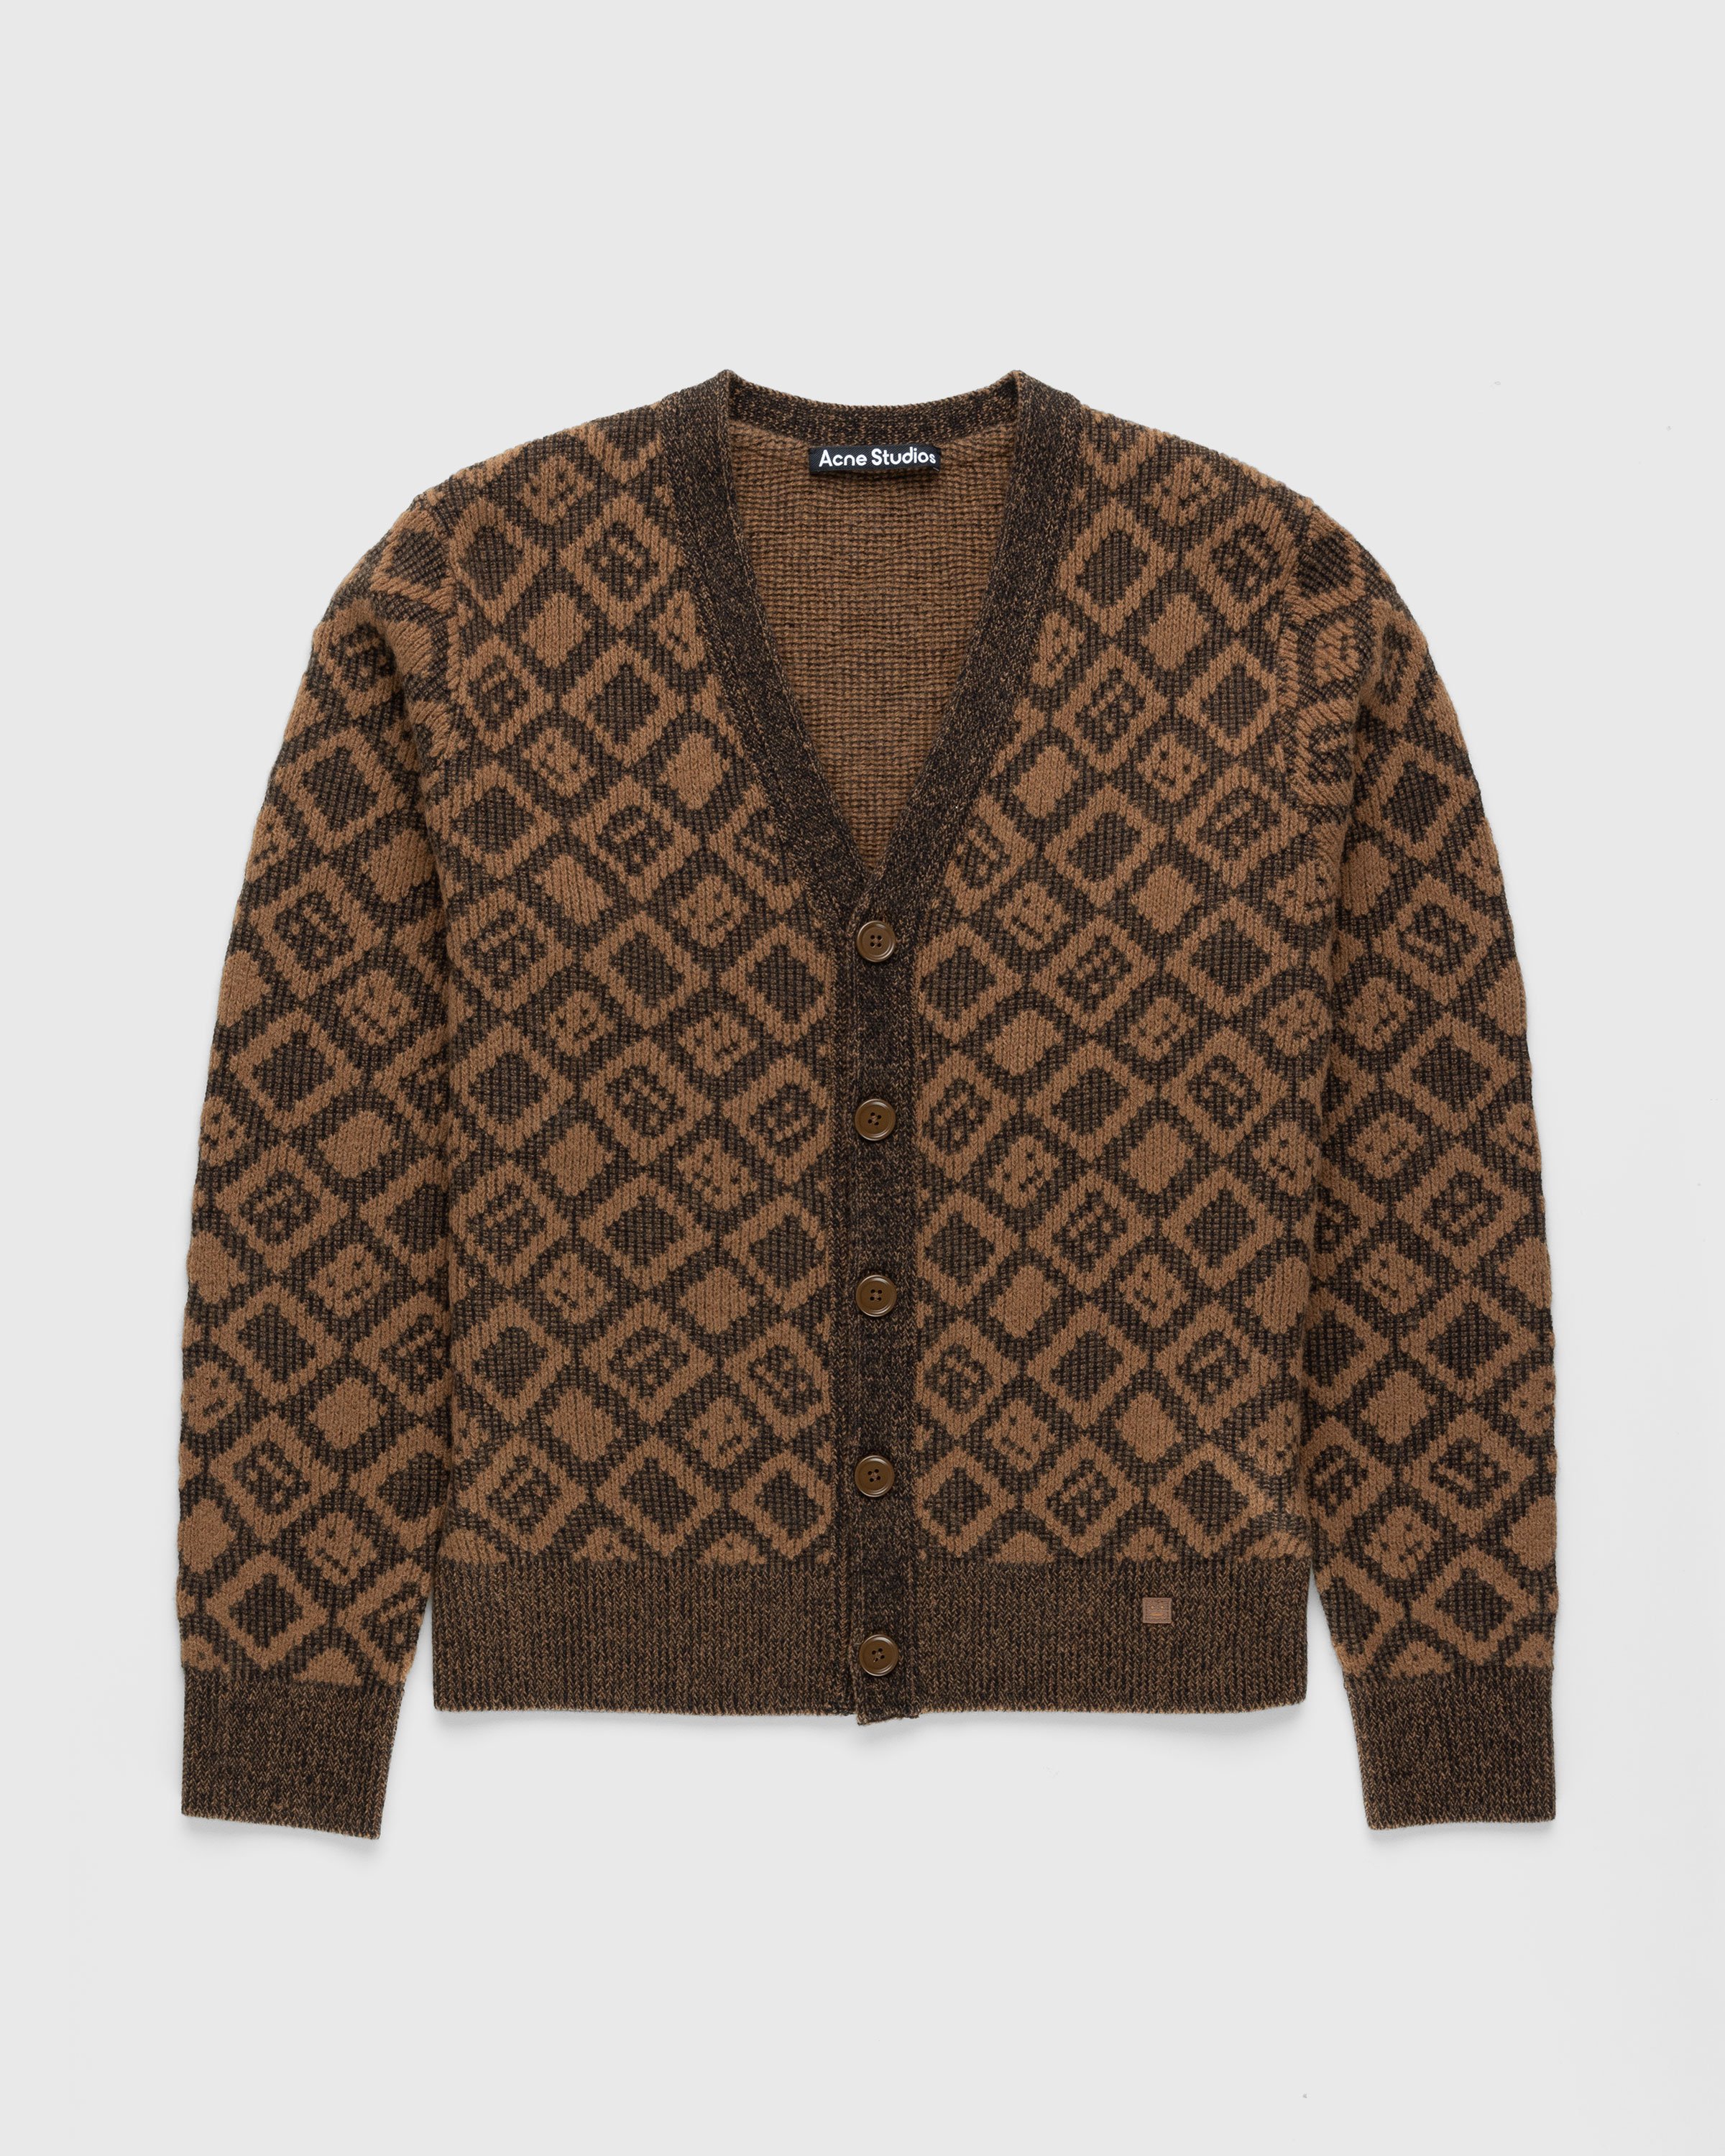 Acne Studios - face Tiles Cardigan Toffee Brown - Clothing - Brown - Image 1